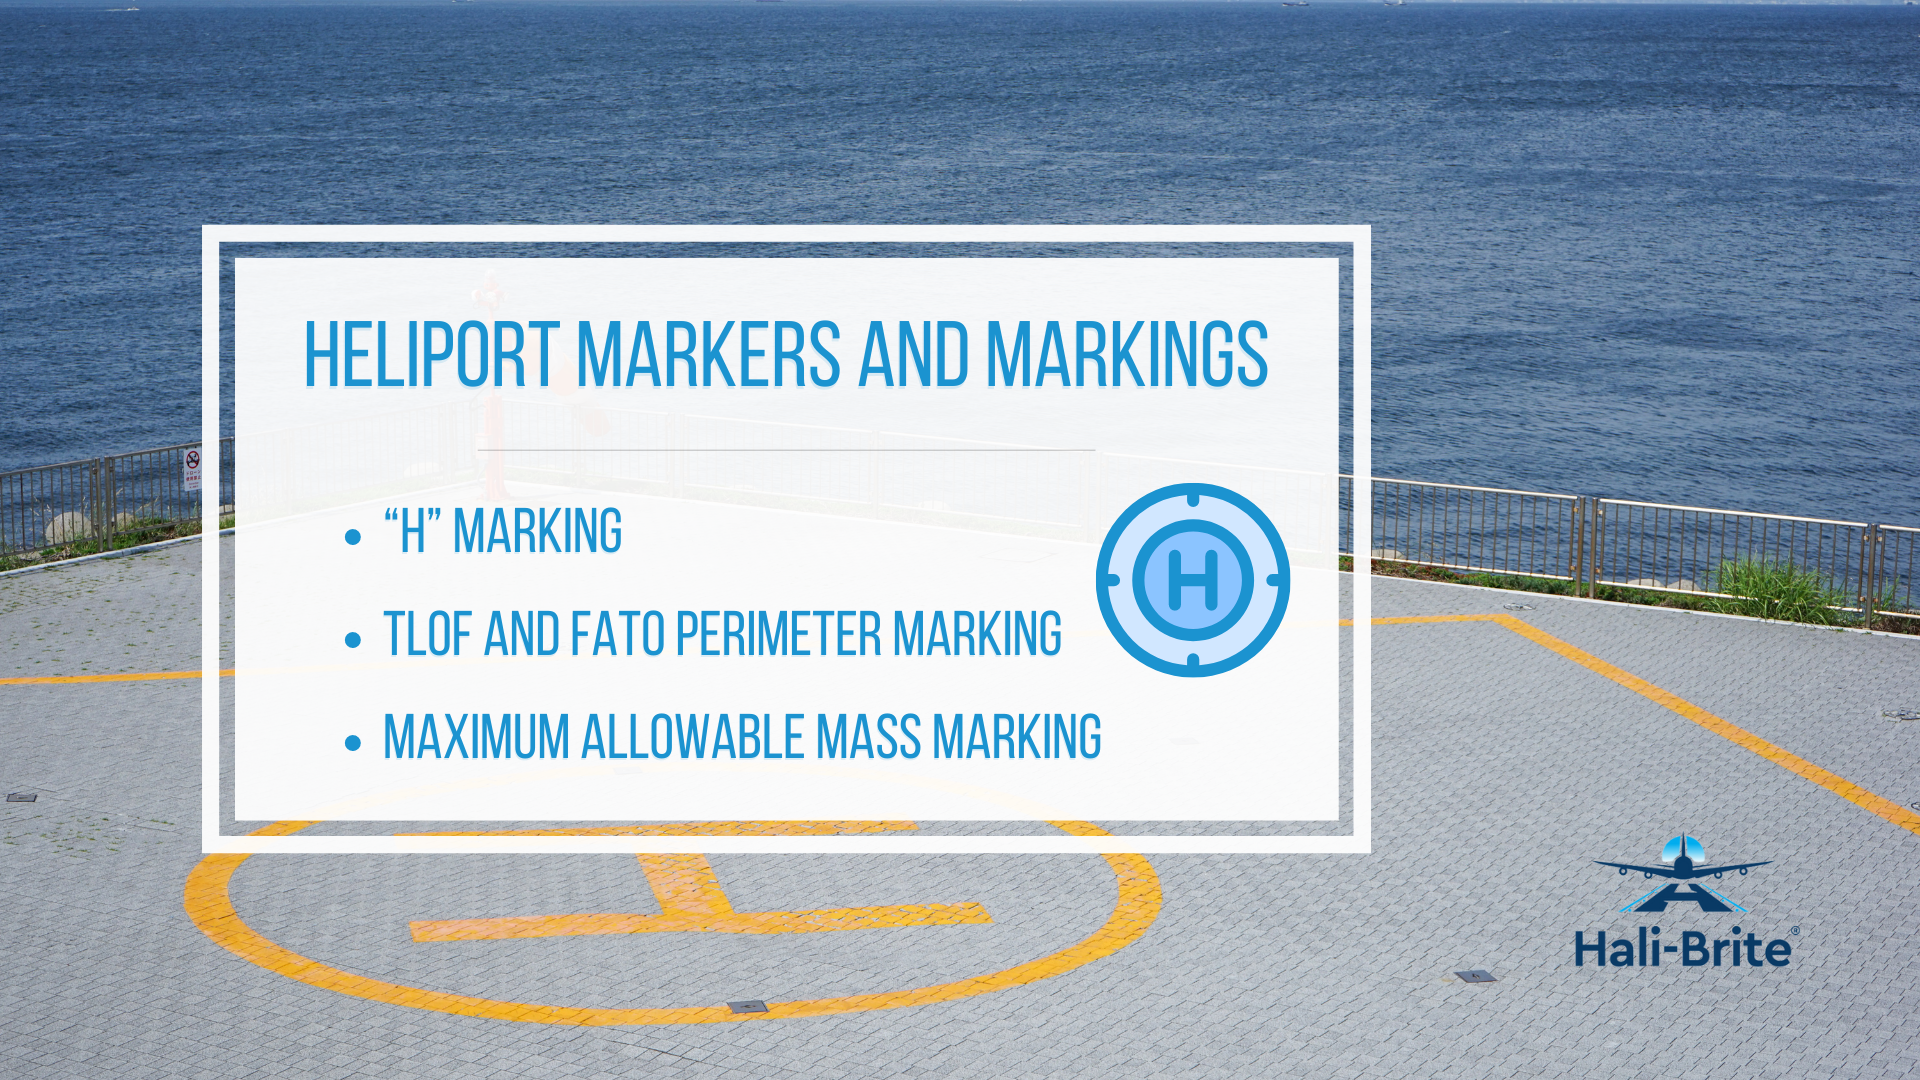 Infographic image of heliport markers and markings